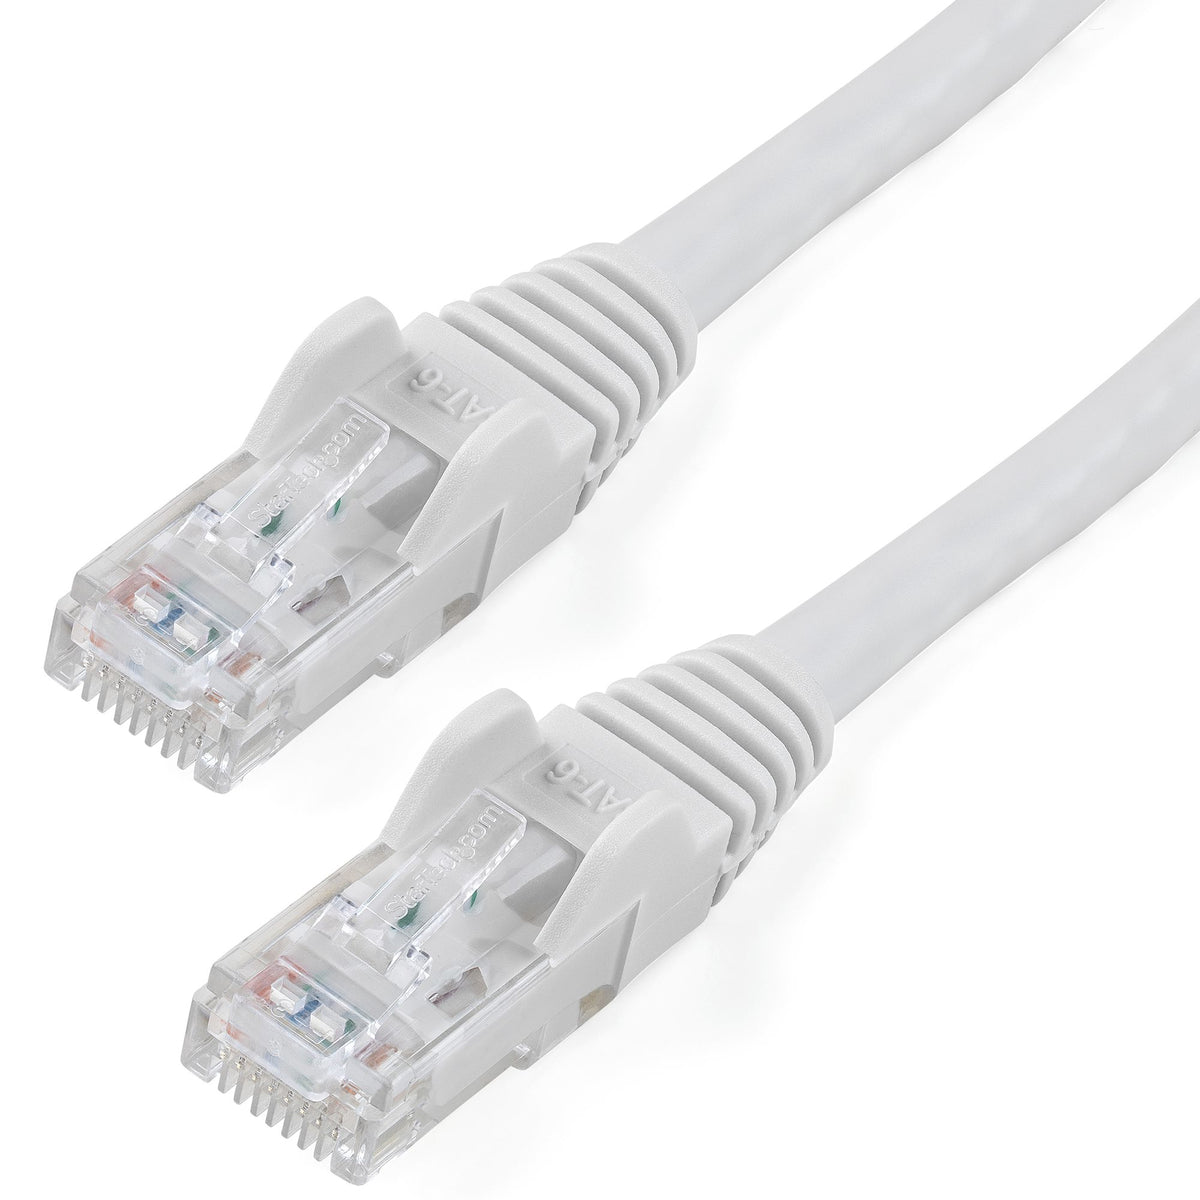 StarTech.com 50ft CAT6 Cable - White CAT6 Ethernet Cable - Gigabit Ethernet Wire - 650MHz 100W PoE RJ45 UTP CAT 6 Network/Patch Cord Snagless - Fluke Tested/Wiring is UL Certified/TIA